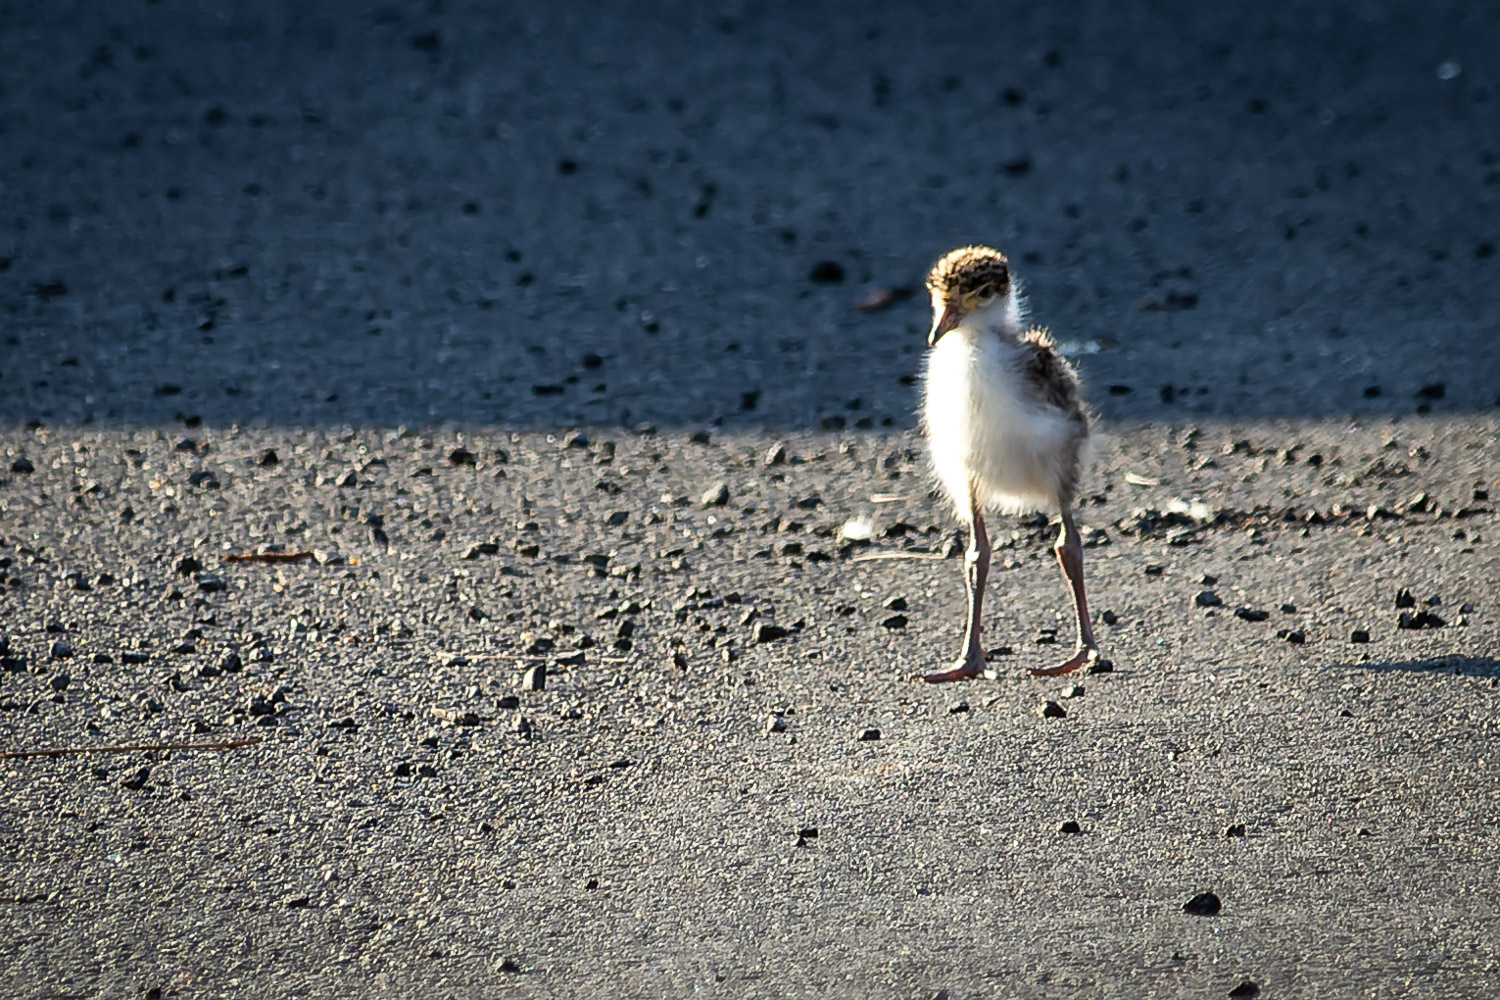 A very small, down-covered masked lapwing chick walking on bitumen